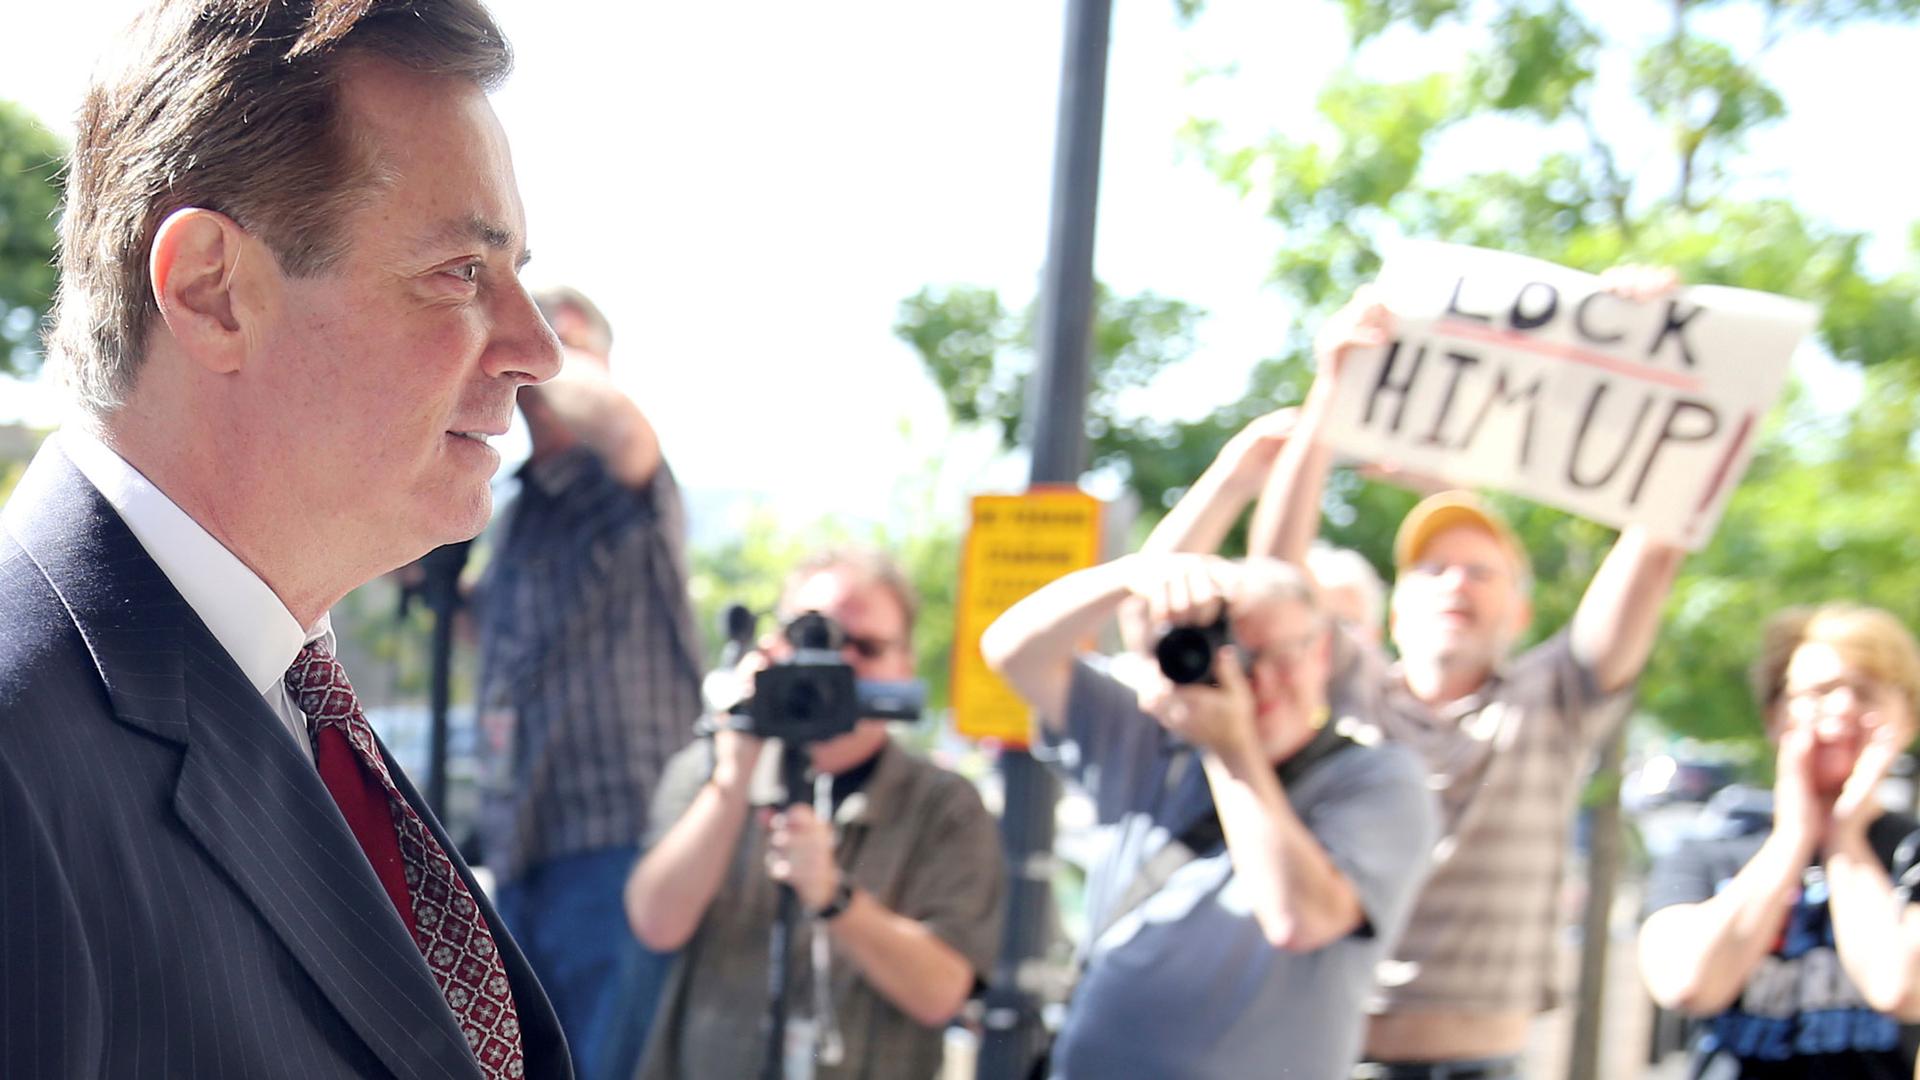 Former Trump campaign chairman Paul Manafort is shown wearing a suit walking past people with cameras.